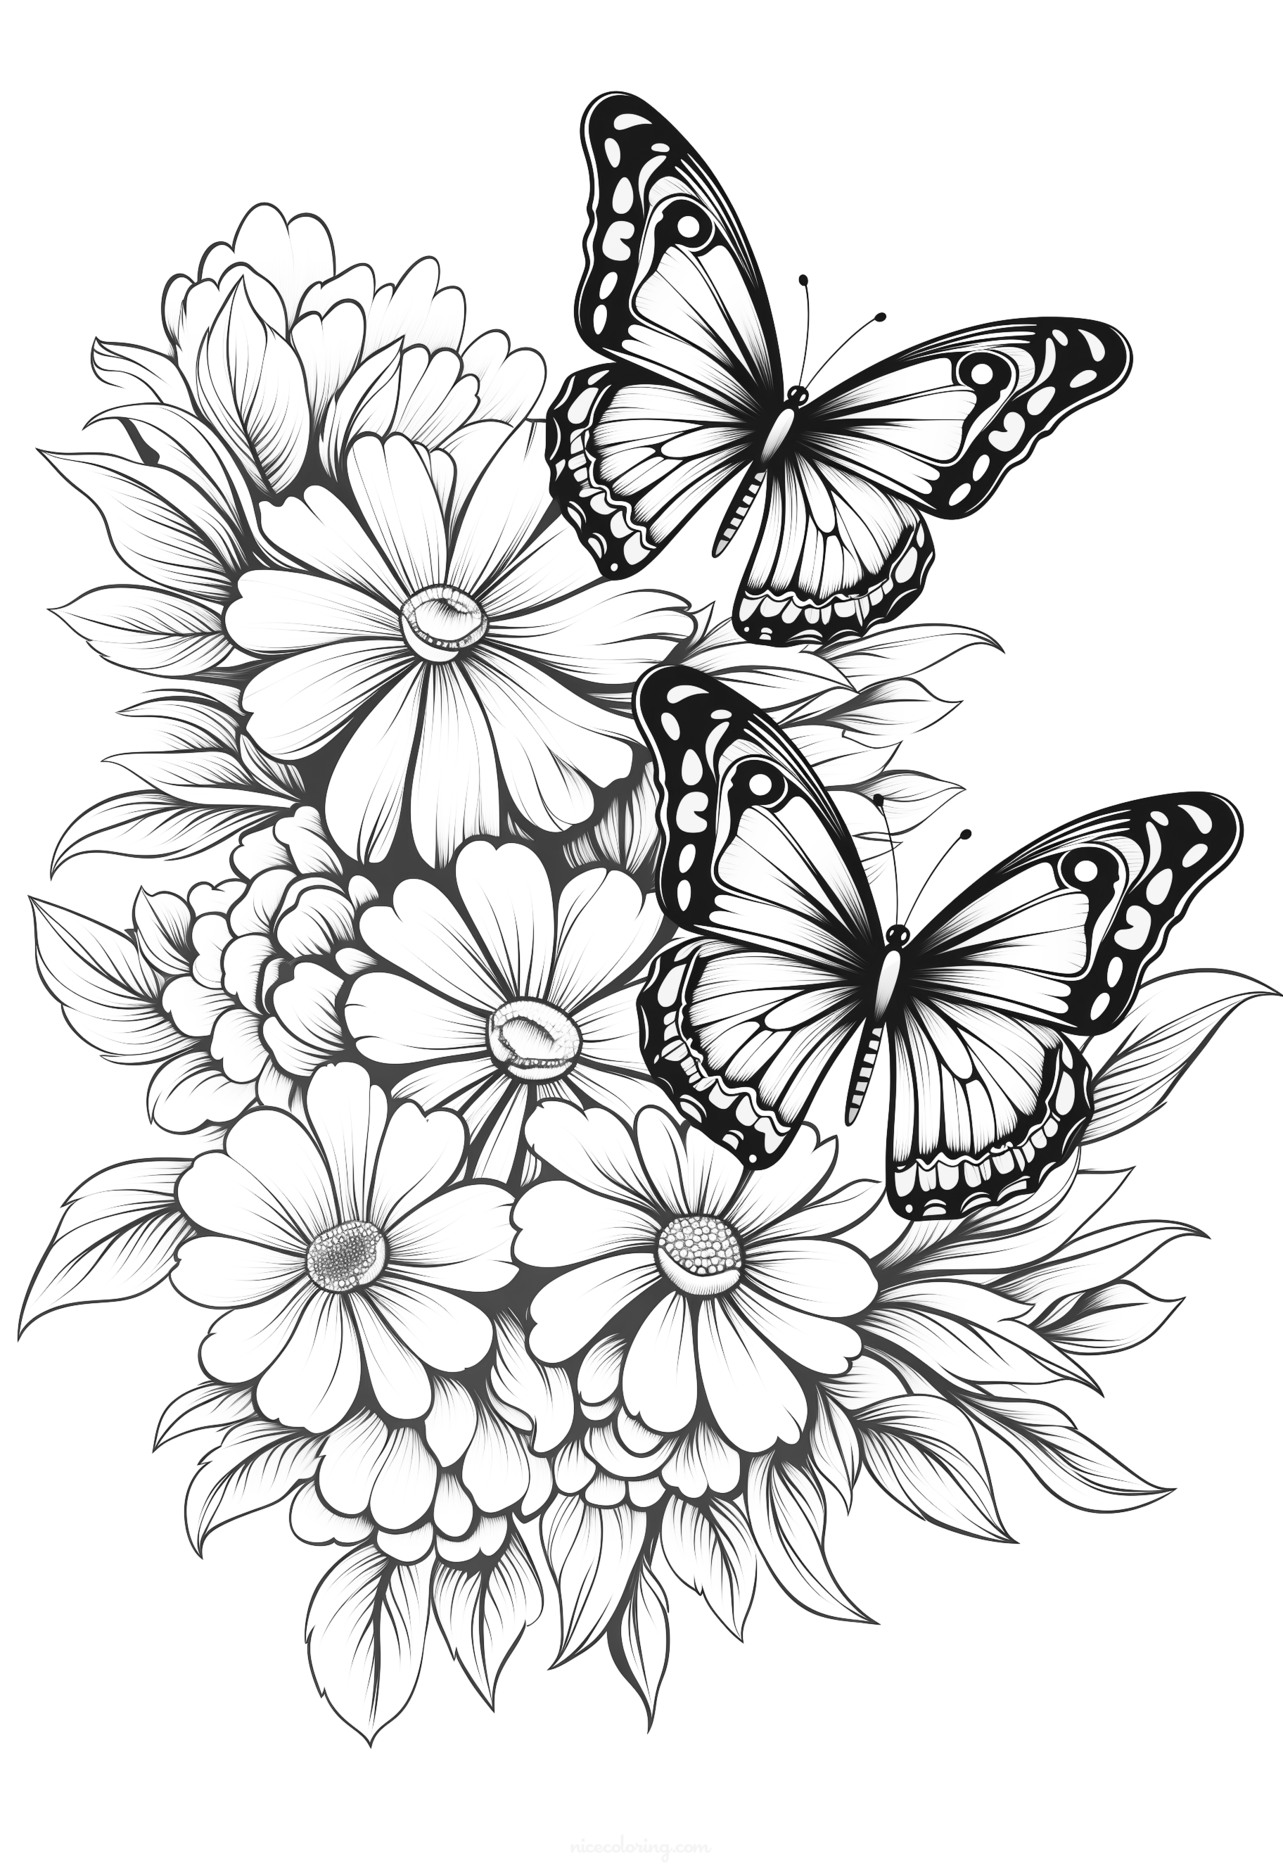 A detailed butterfly coloring page with intricate patterns